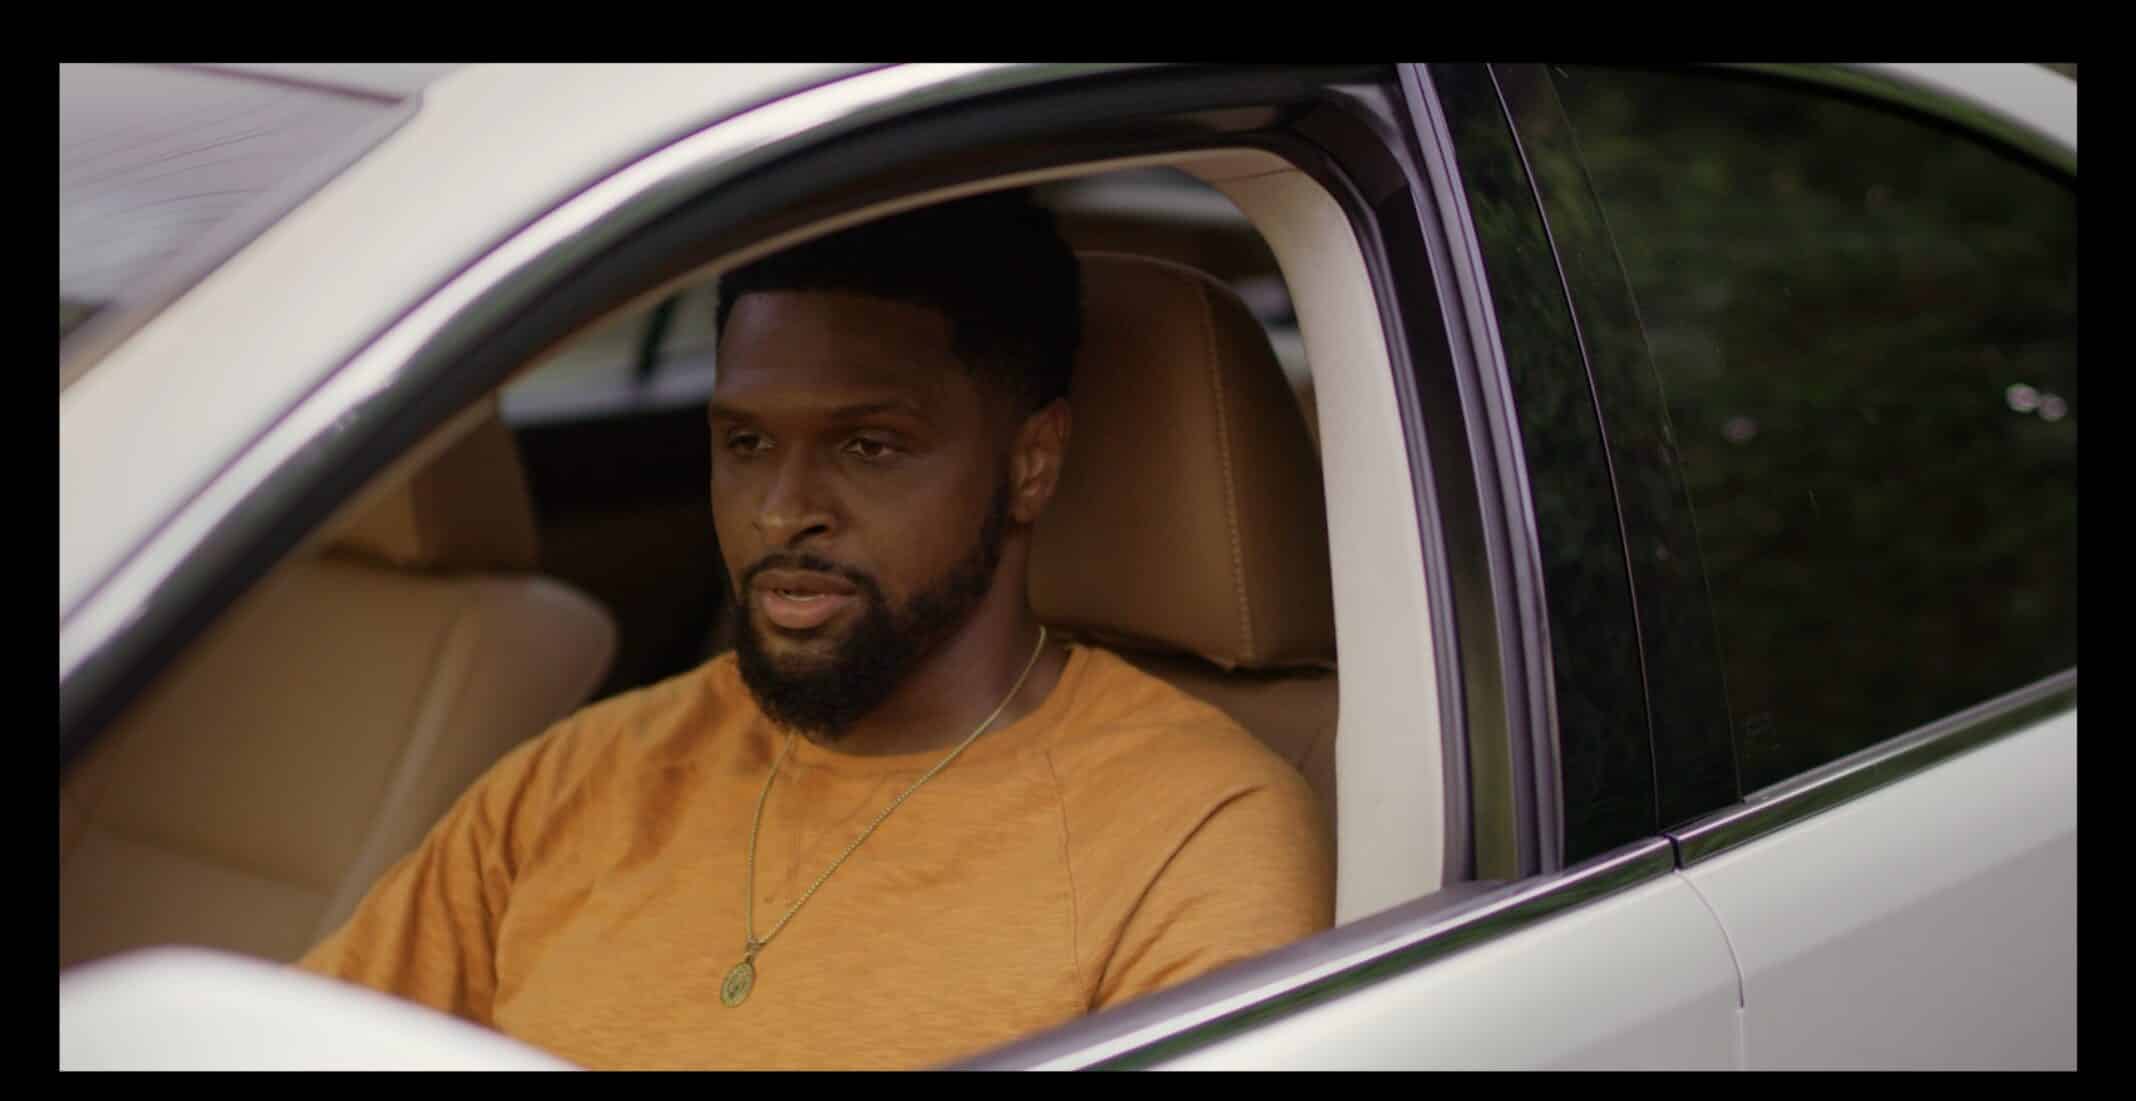 For The Love of Jason: Season 1/ Episode 3 “The Single Guy” – Recap/ Review (with Spoilers)